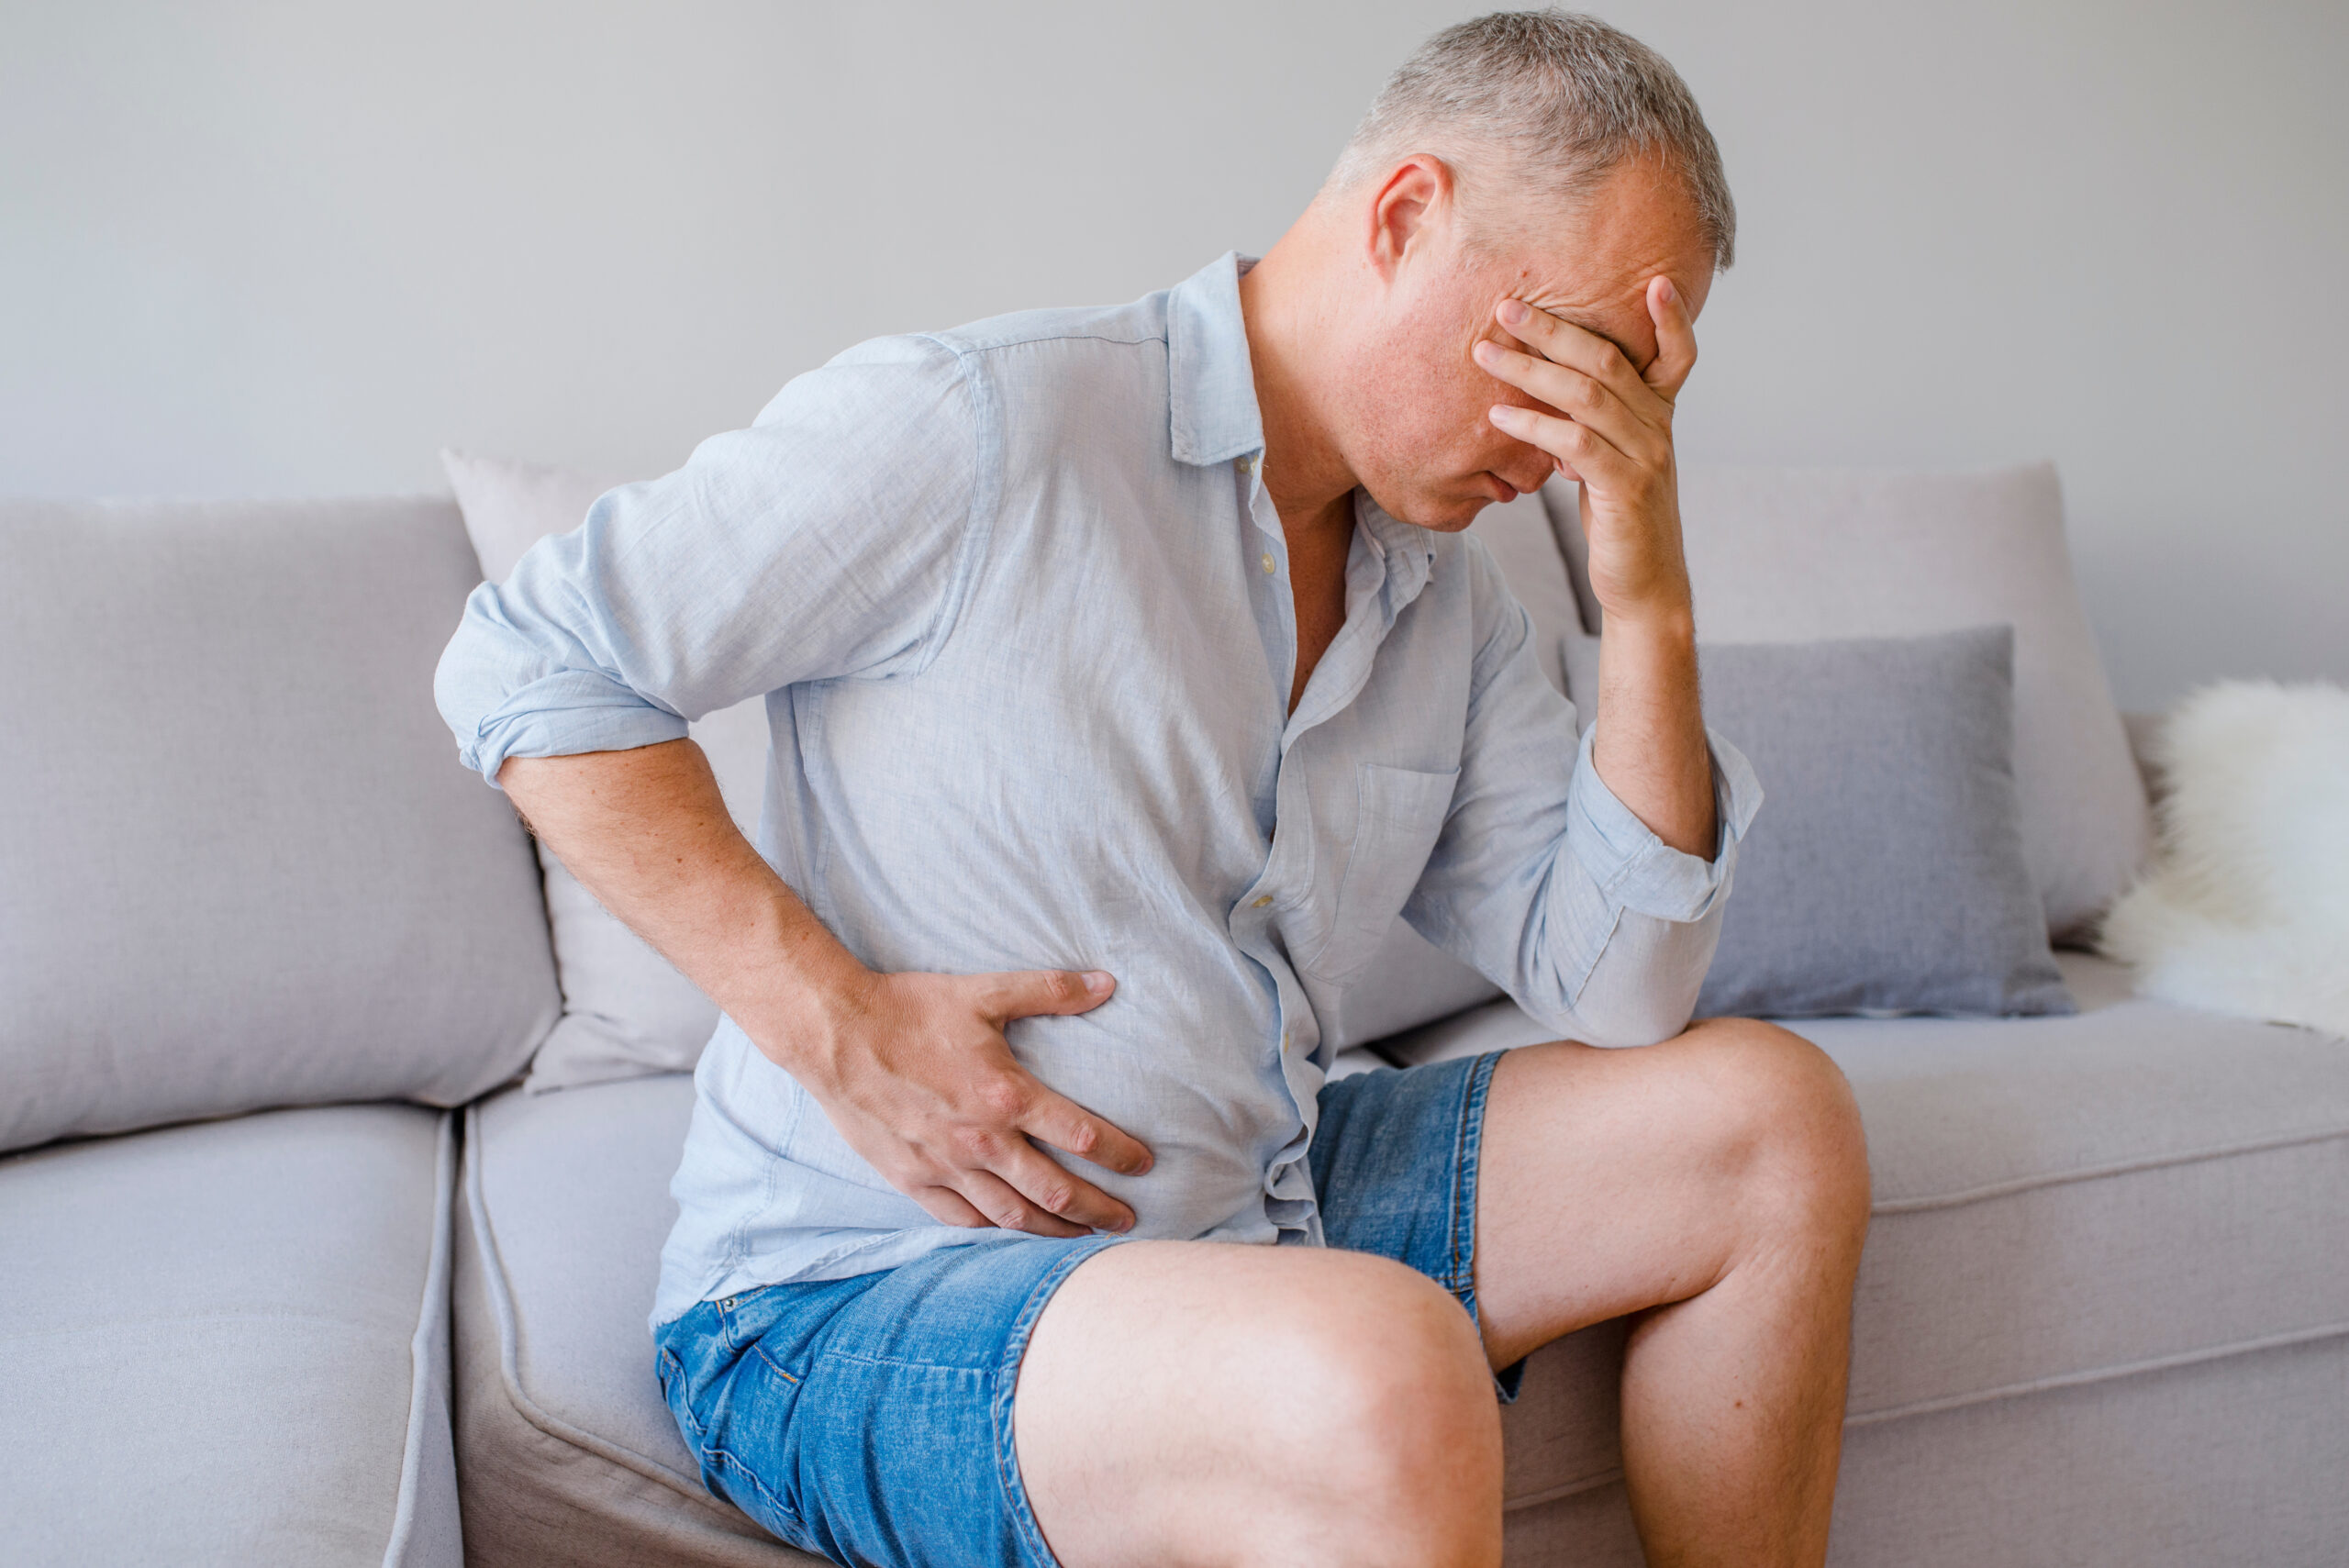 A middle-aged man has a stomach ache